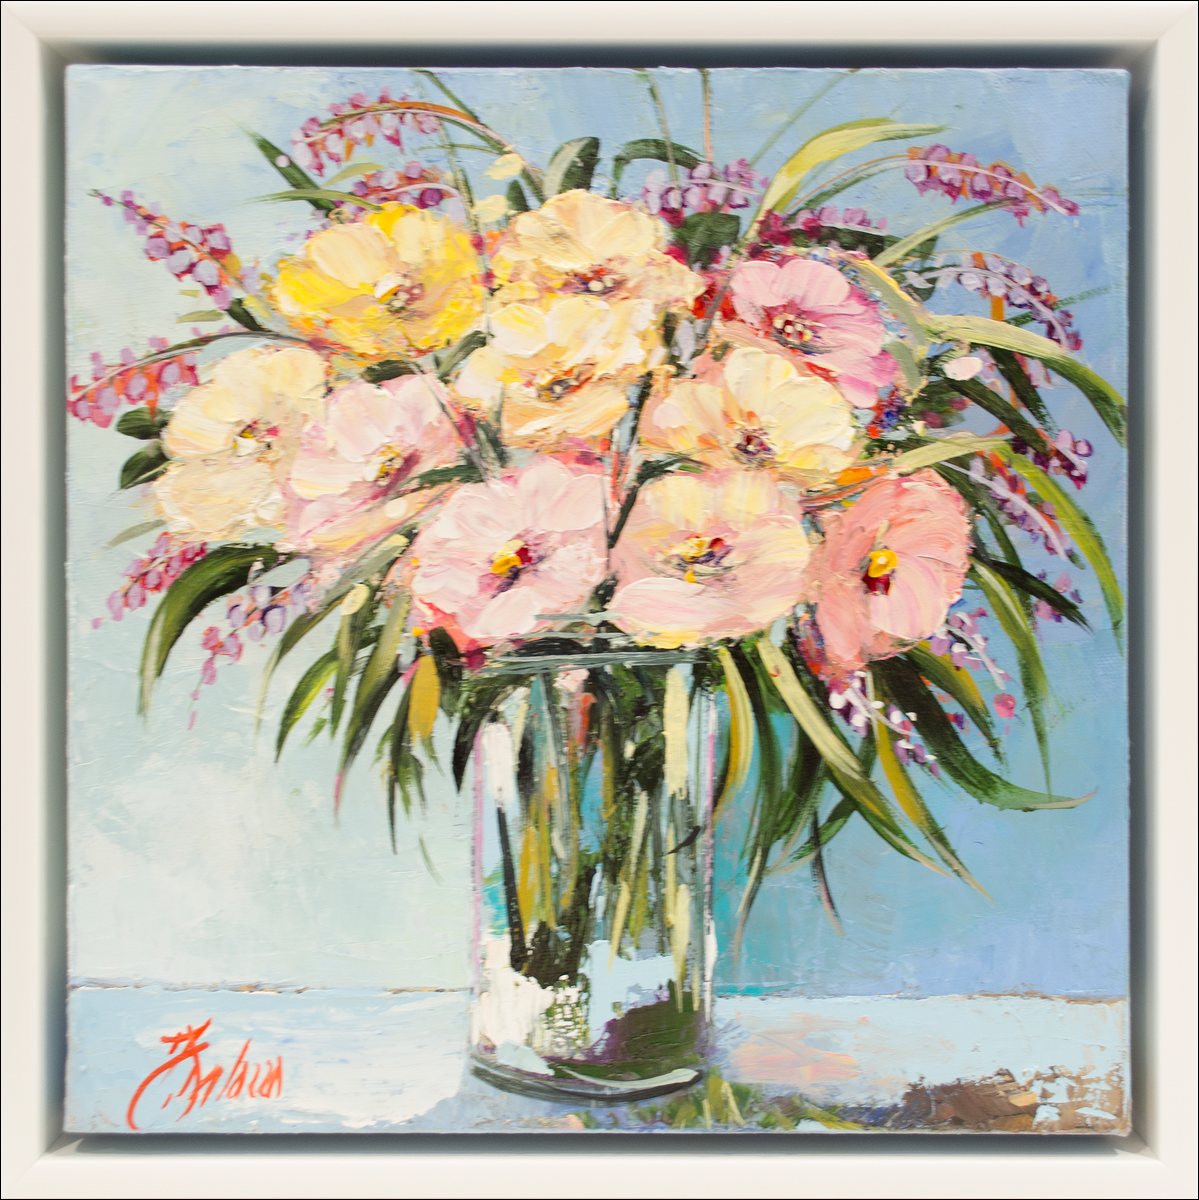 Framed Front View Of Still Life Painting "Soft Pink Floral Study" By Judith Dalozzo